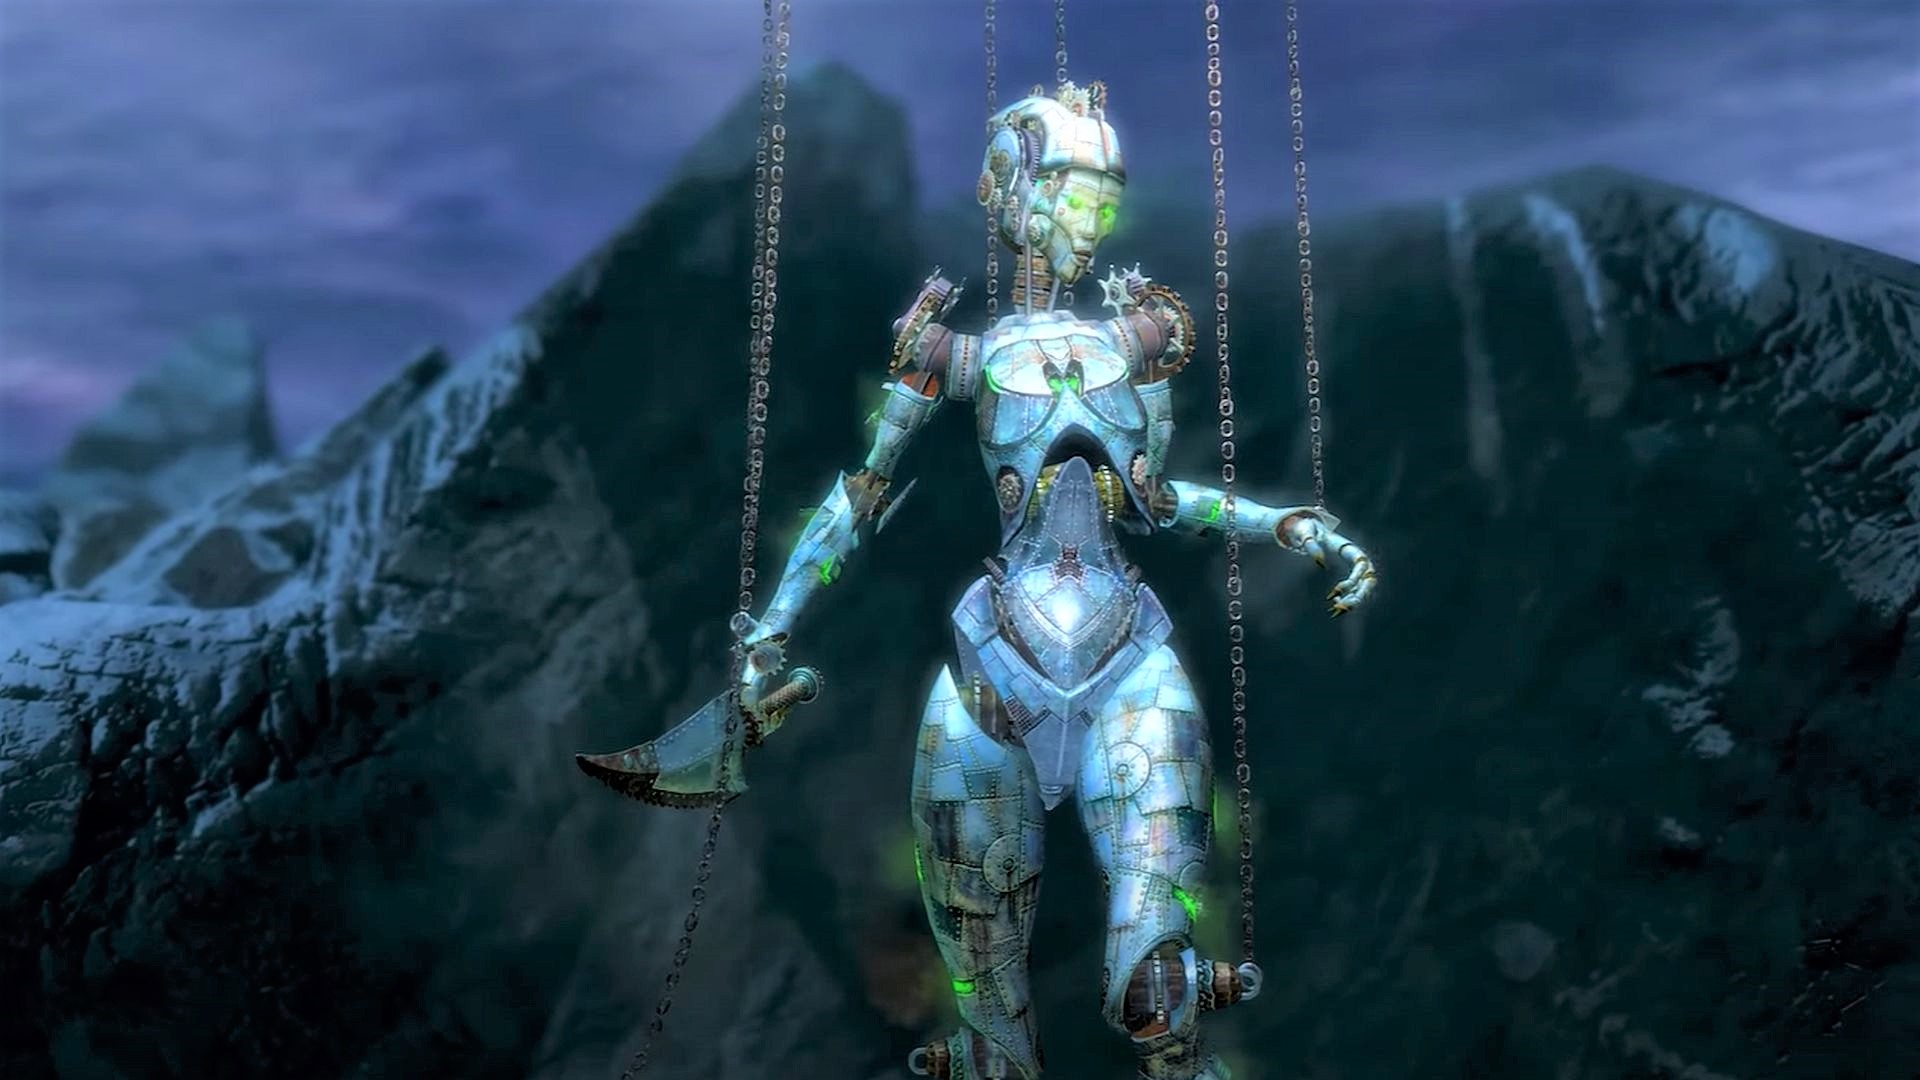 Guild Wars 2 devs wanted to keep Twisted Marionette’s encounter “true to itself”